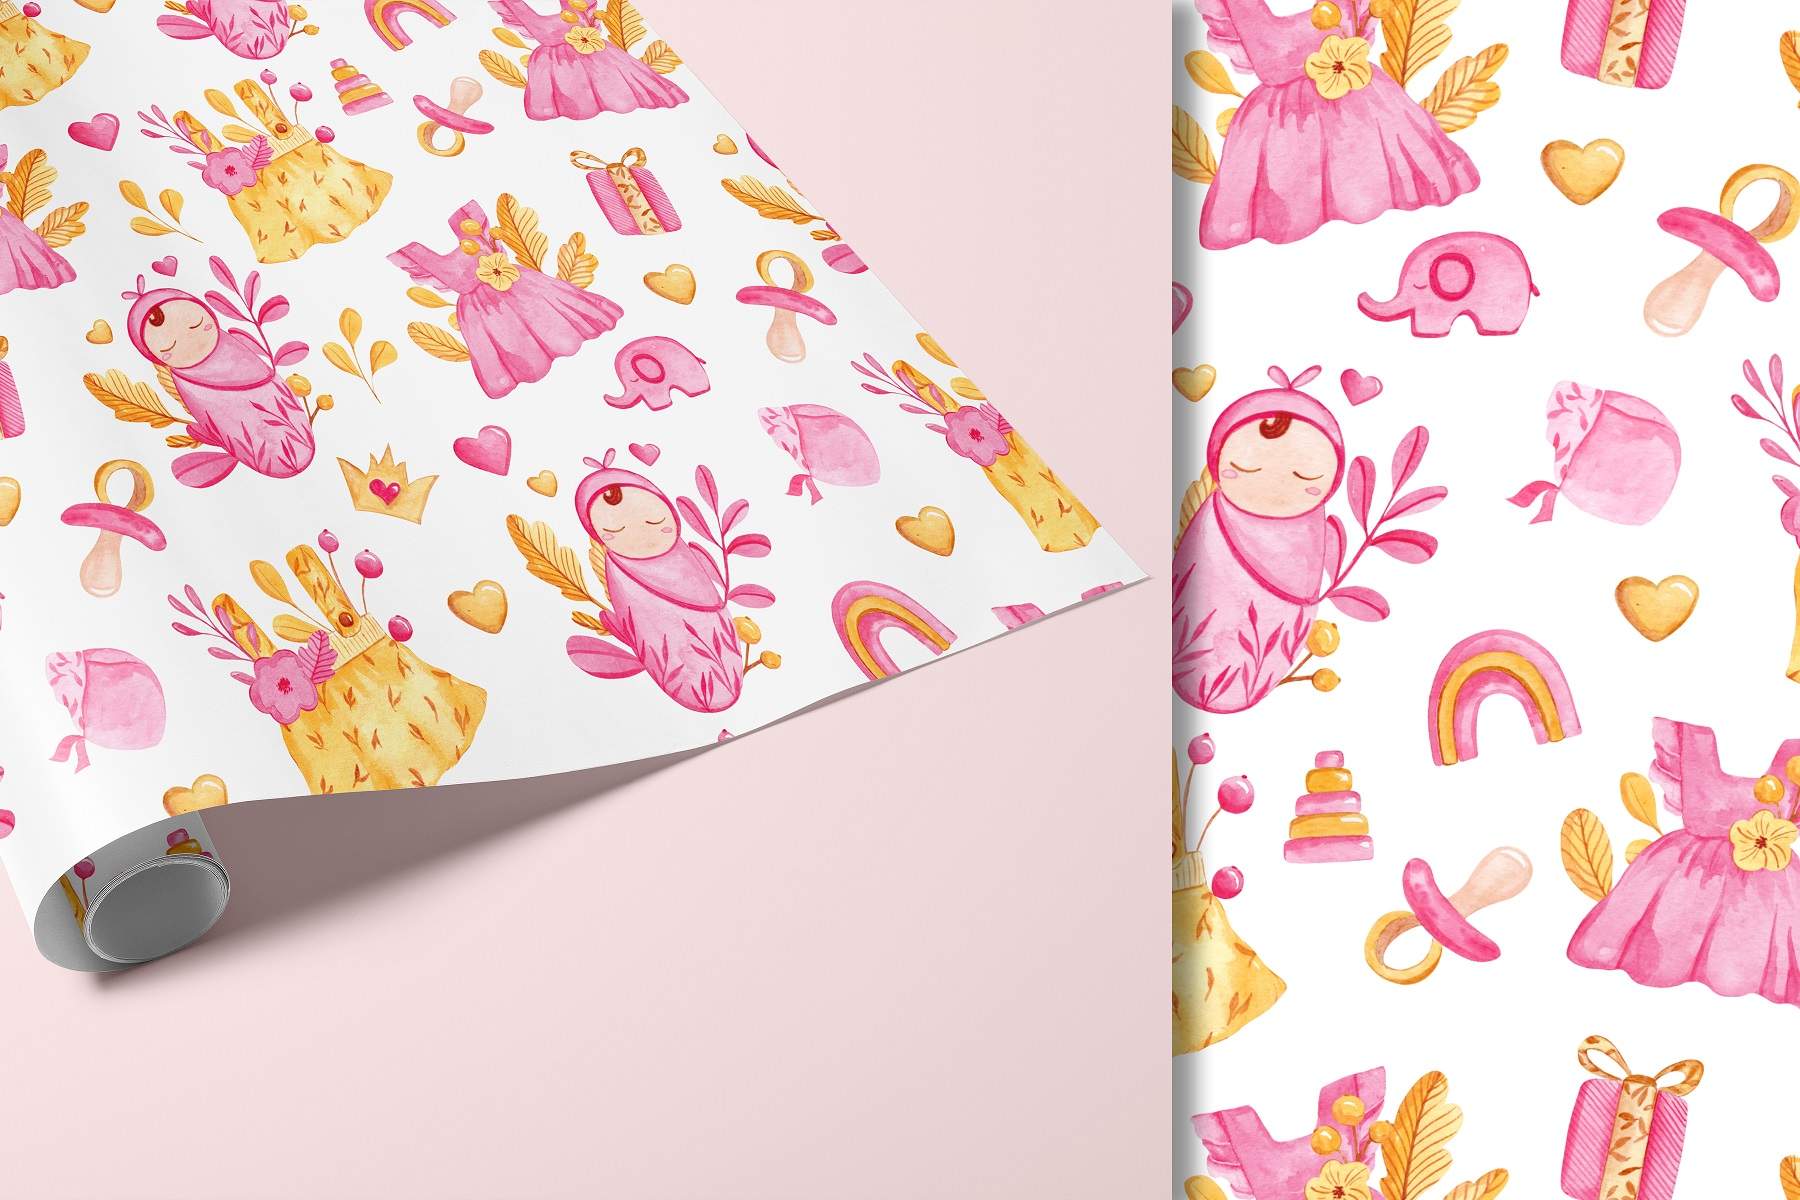 Pink and yellow wallpaper with princesses on it.